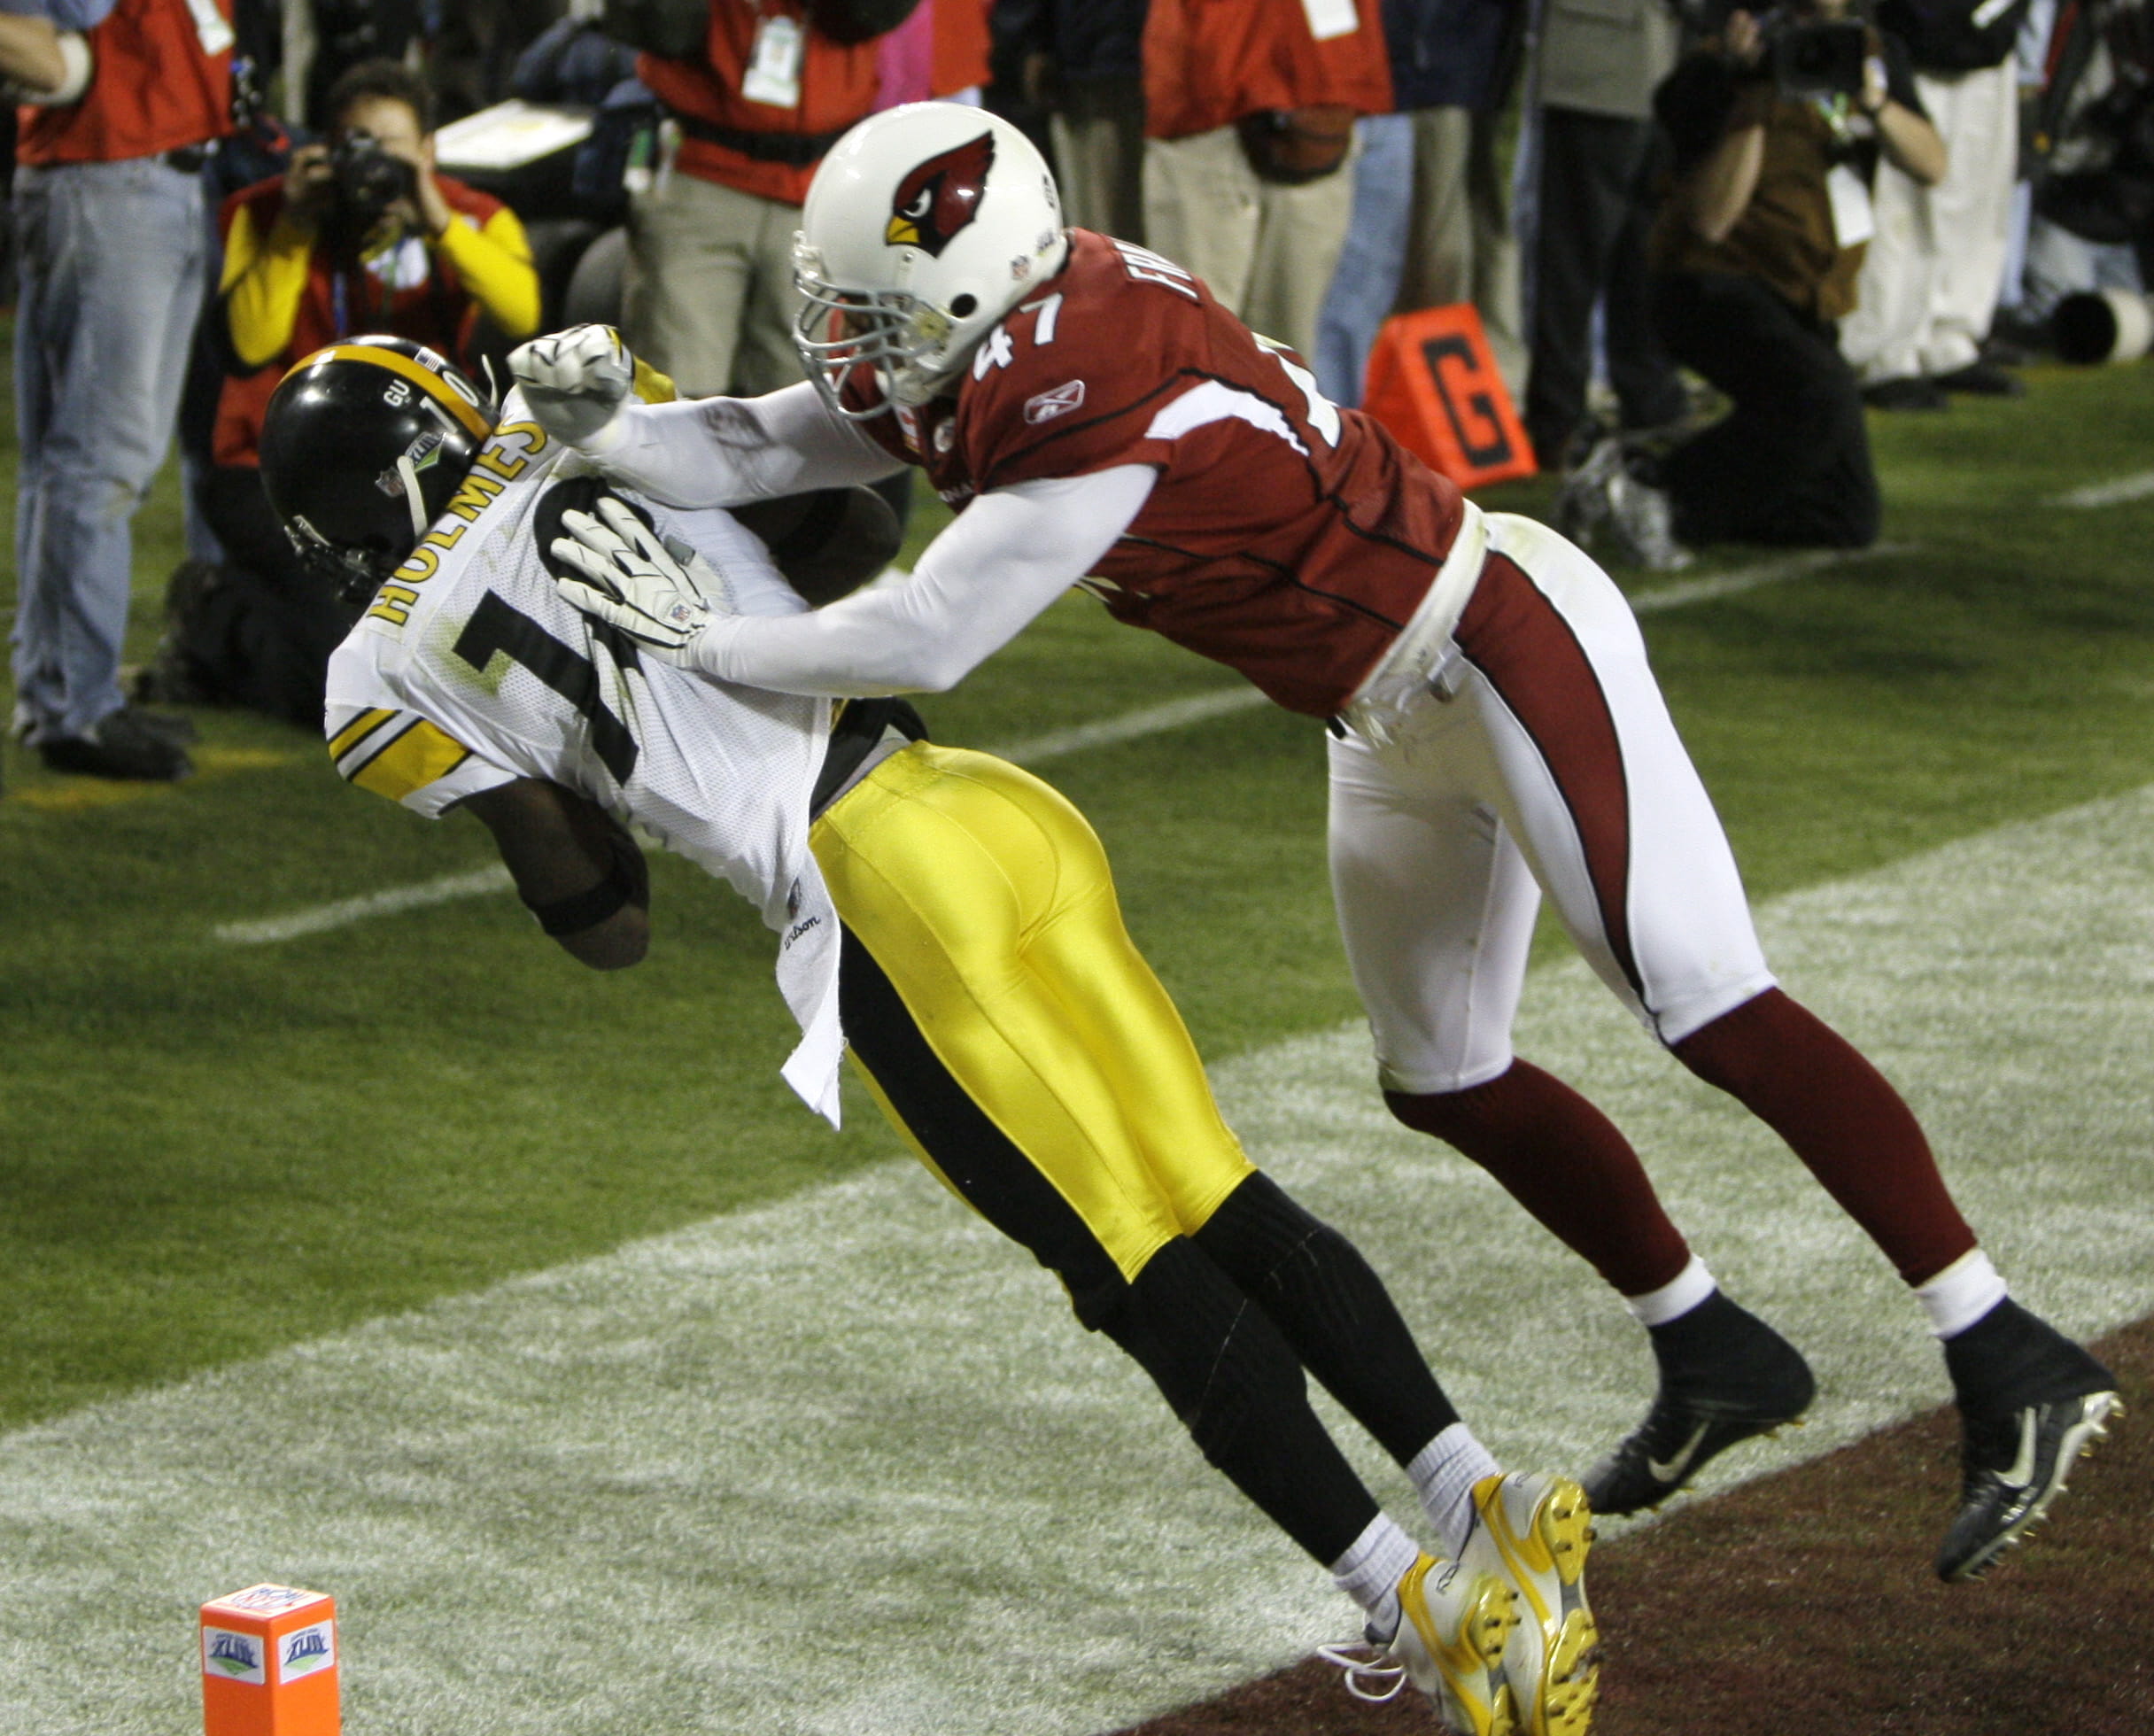 Pittsburgh Steelers wide receiver Santonio Holmes makes a touchdown catch in front of Cardinals safety Aaron Francisco during the fourth quarter of Super Bowl XLIII.